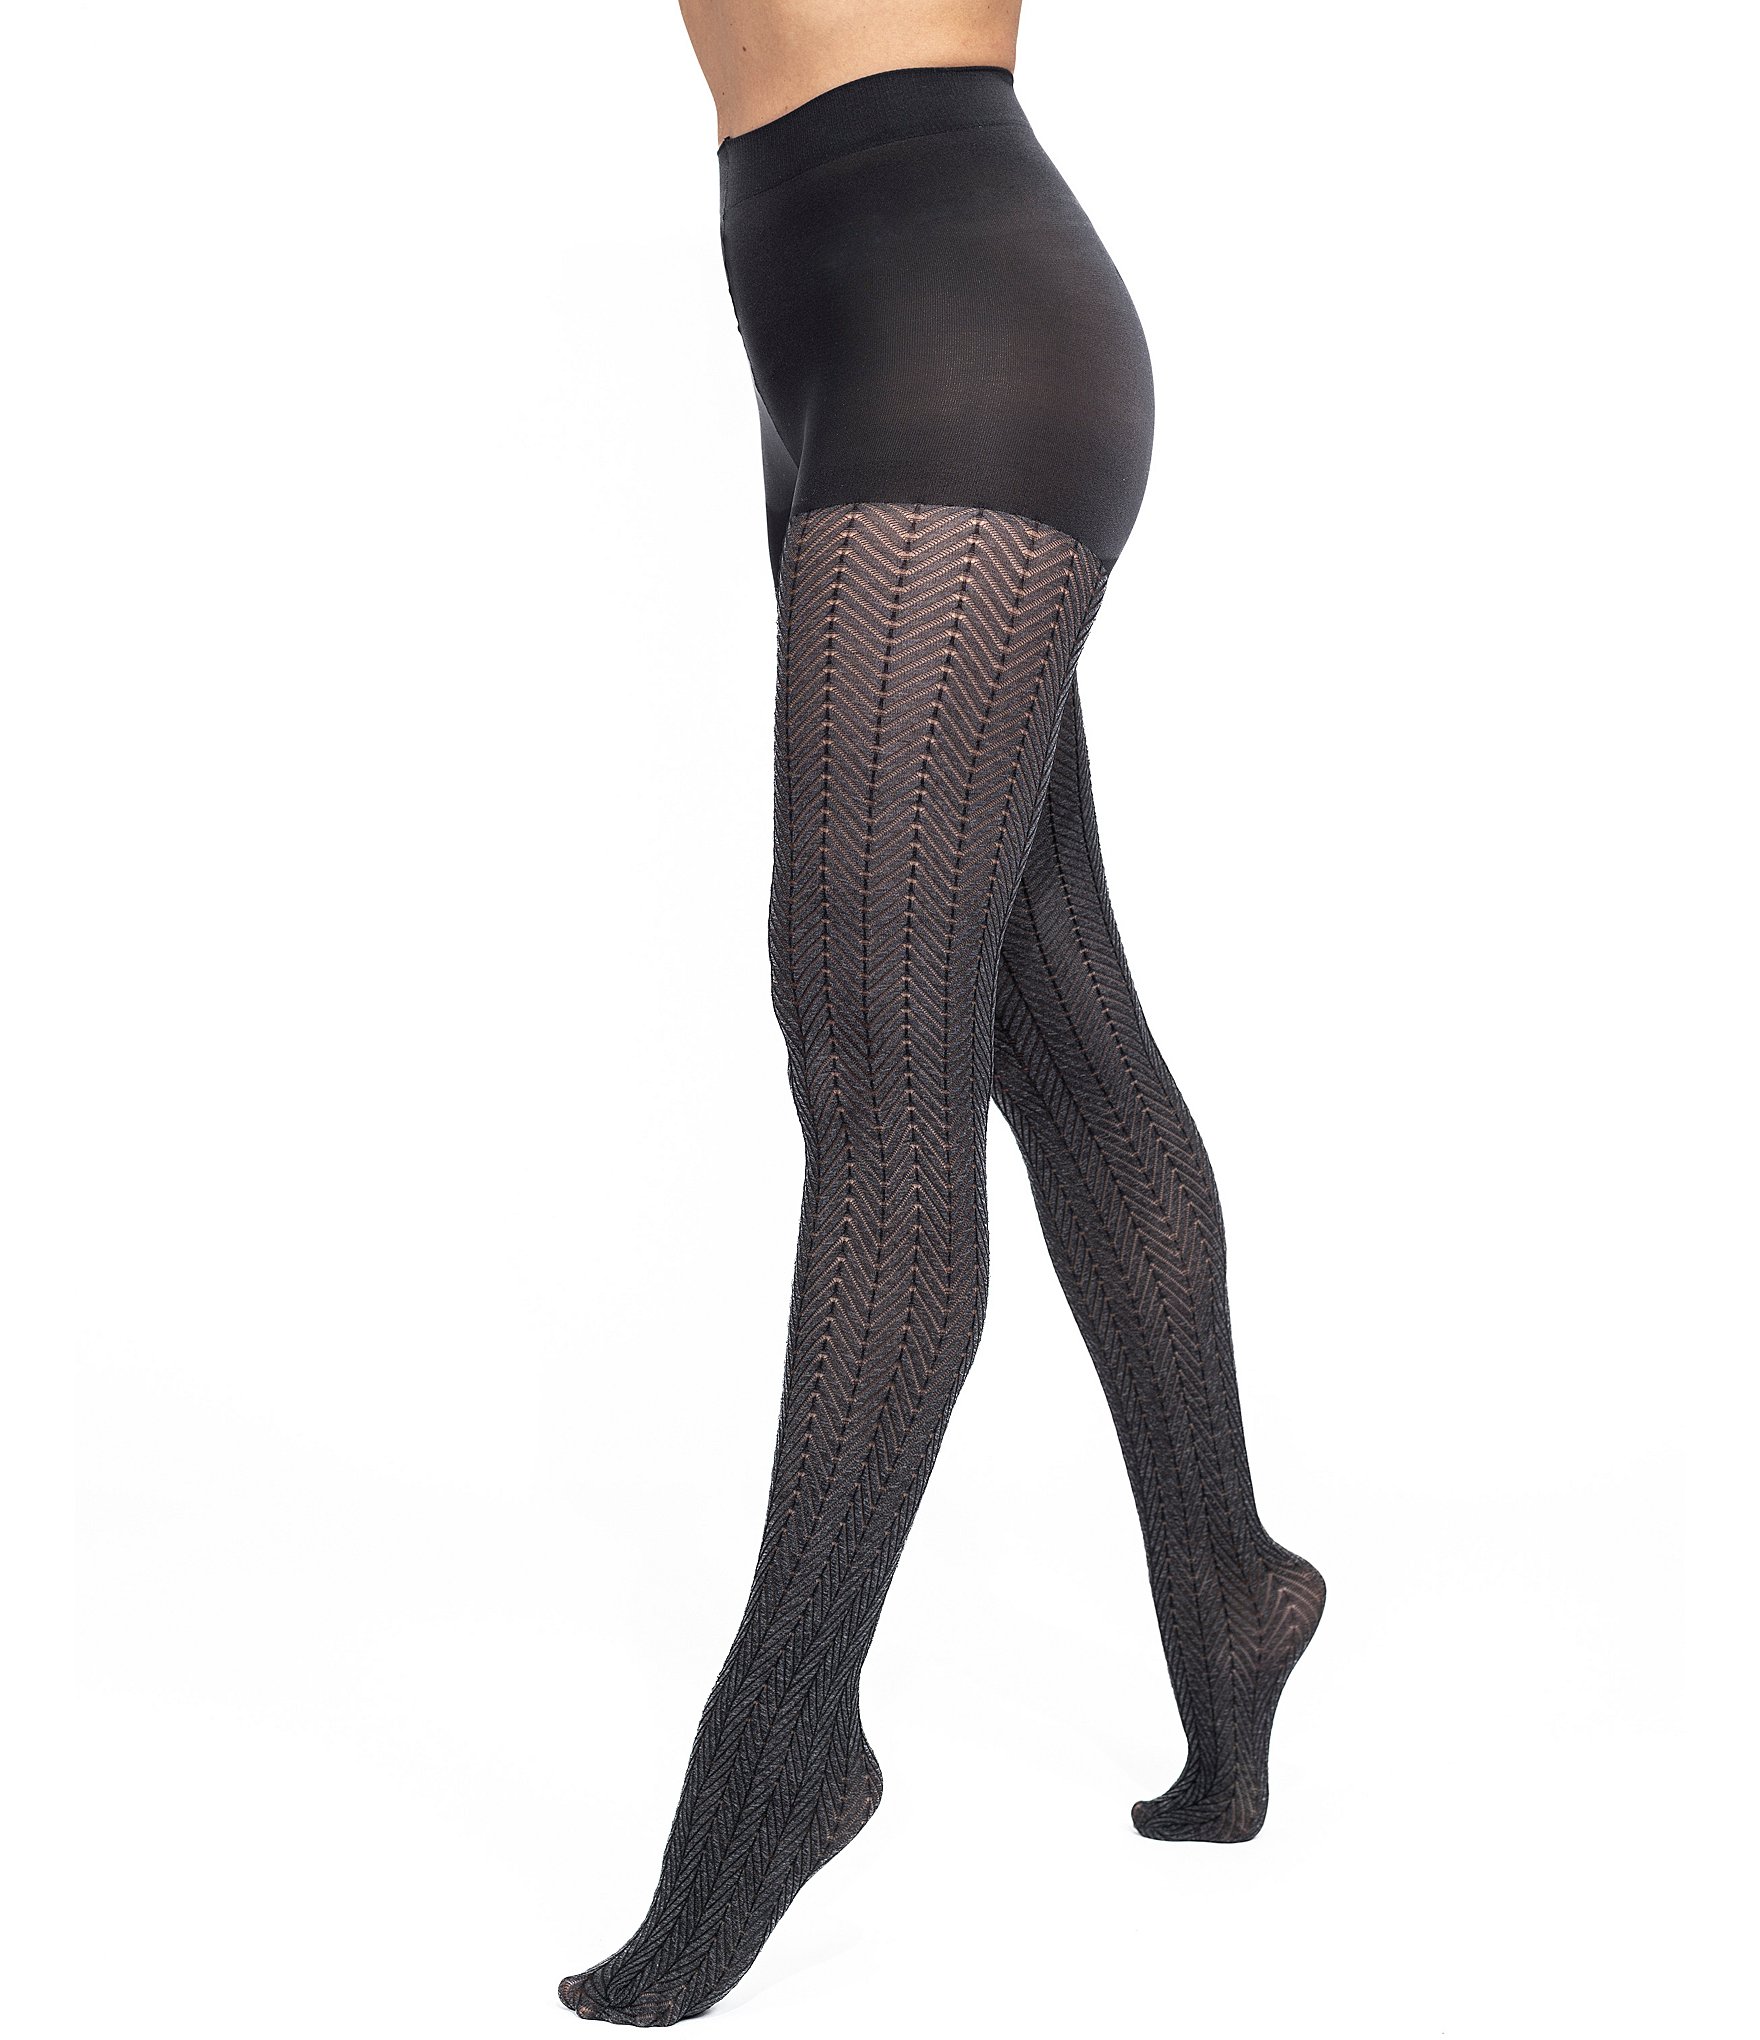  Women's Tights - Women's Tights / Women's Socks & Hosiery:  Clothing, Shoes & Jewelry